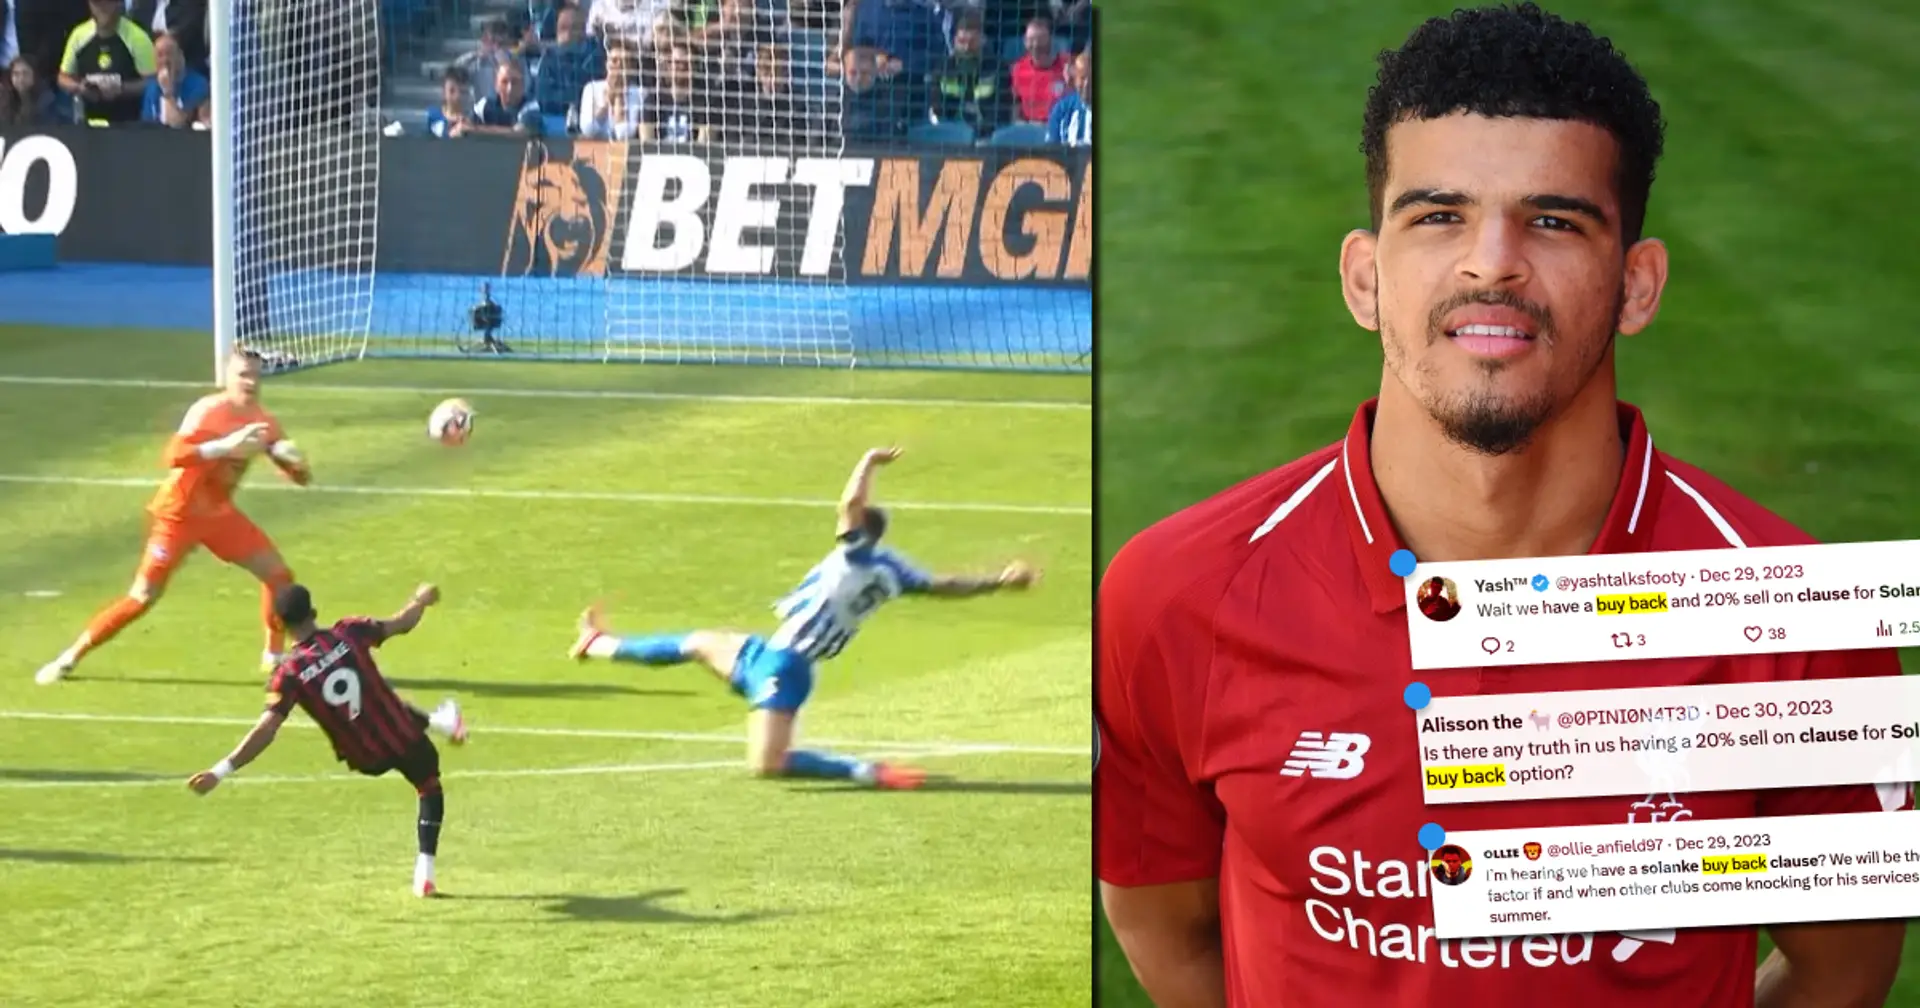 Can Liverpool buy Dominic Solanke back now that he fires double digits for Bournemouth?